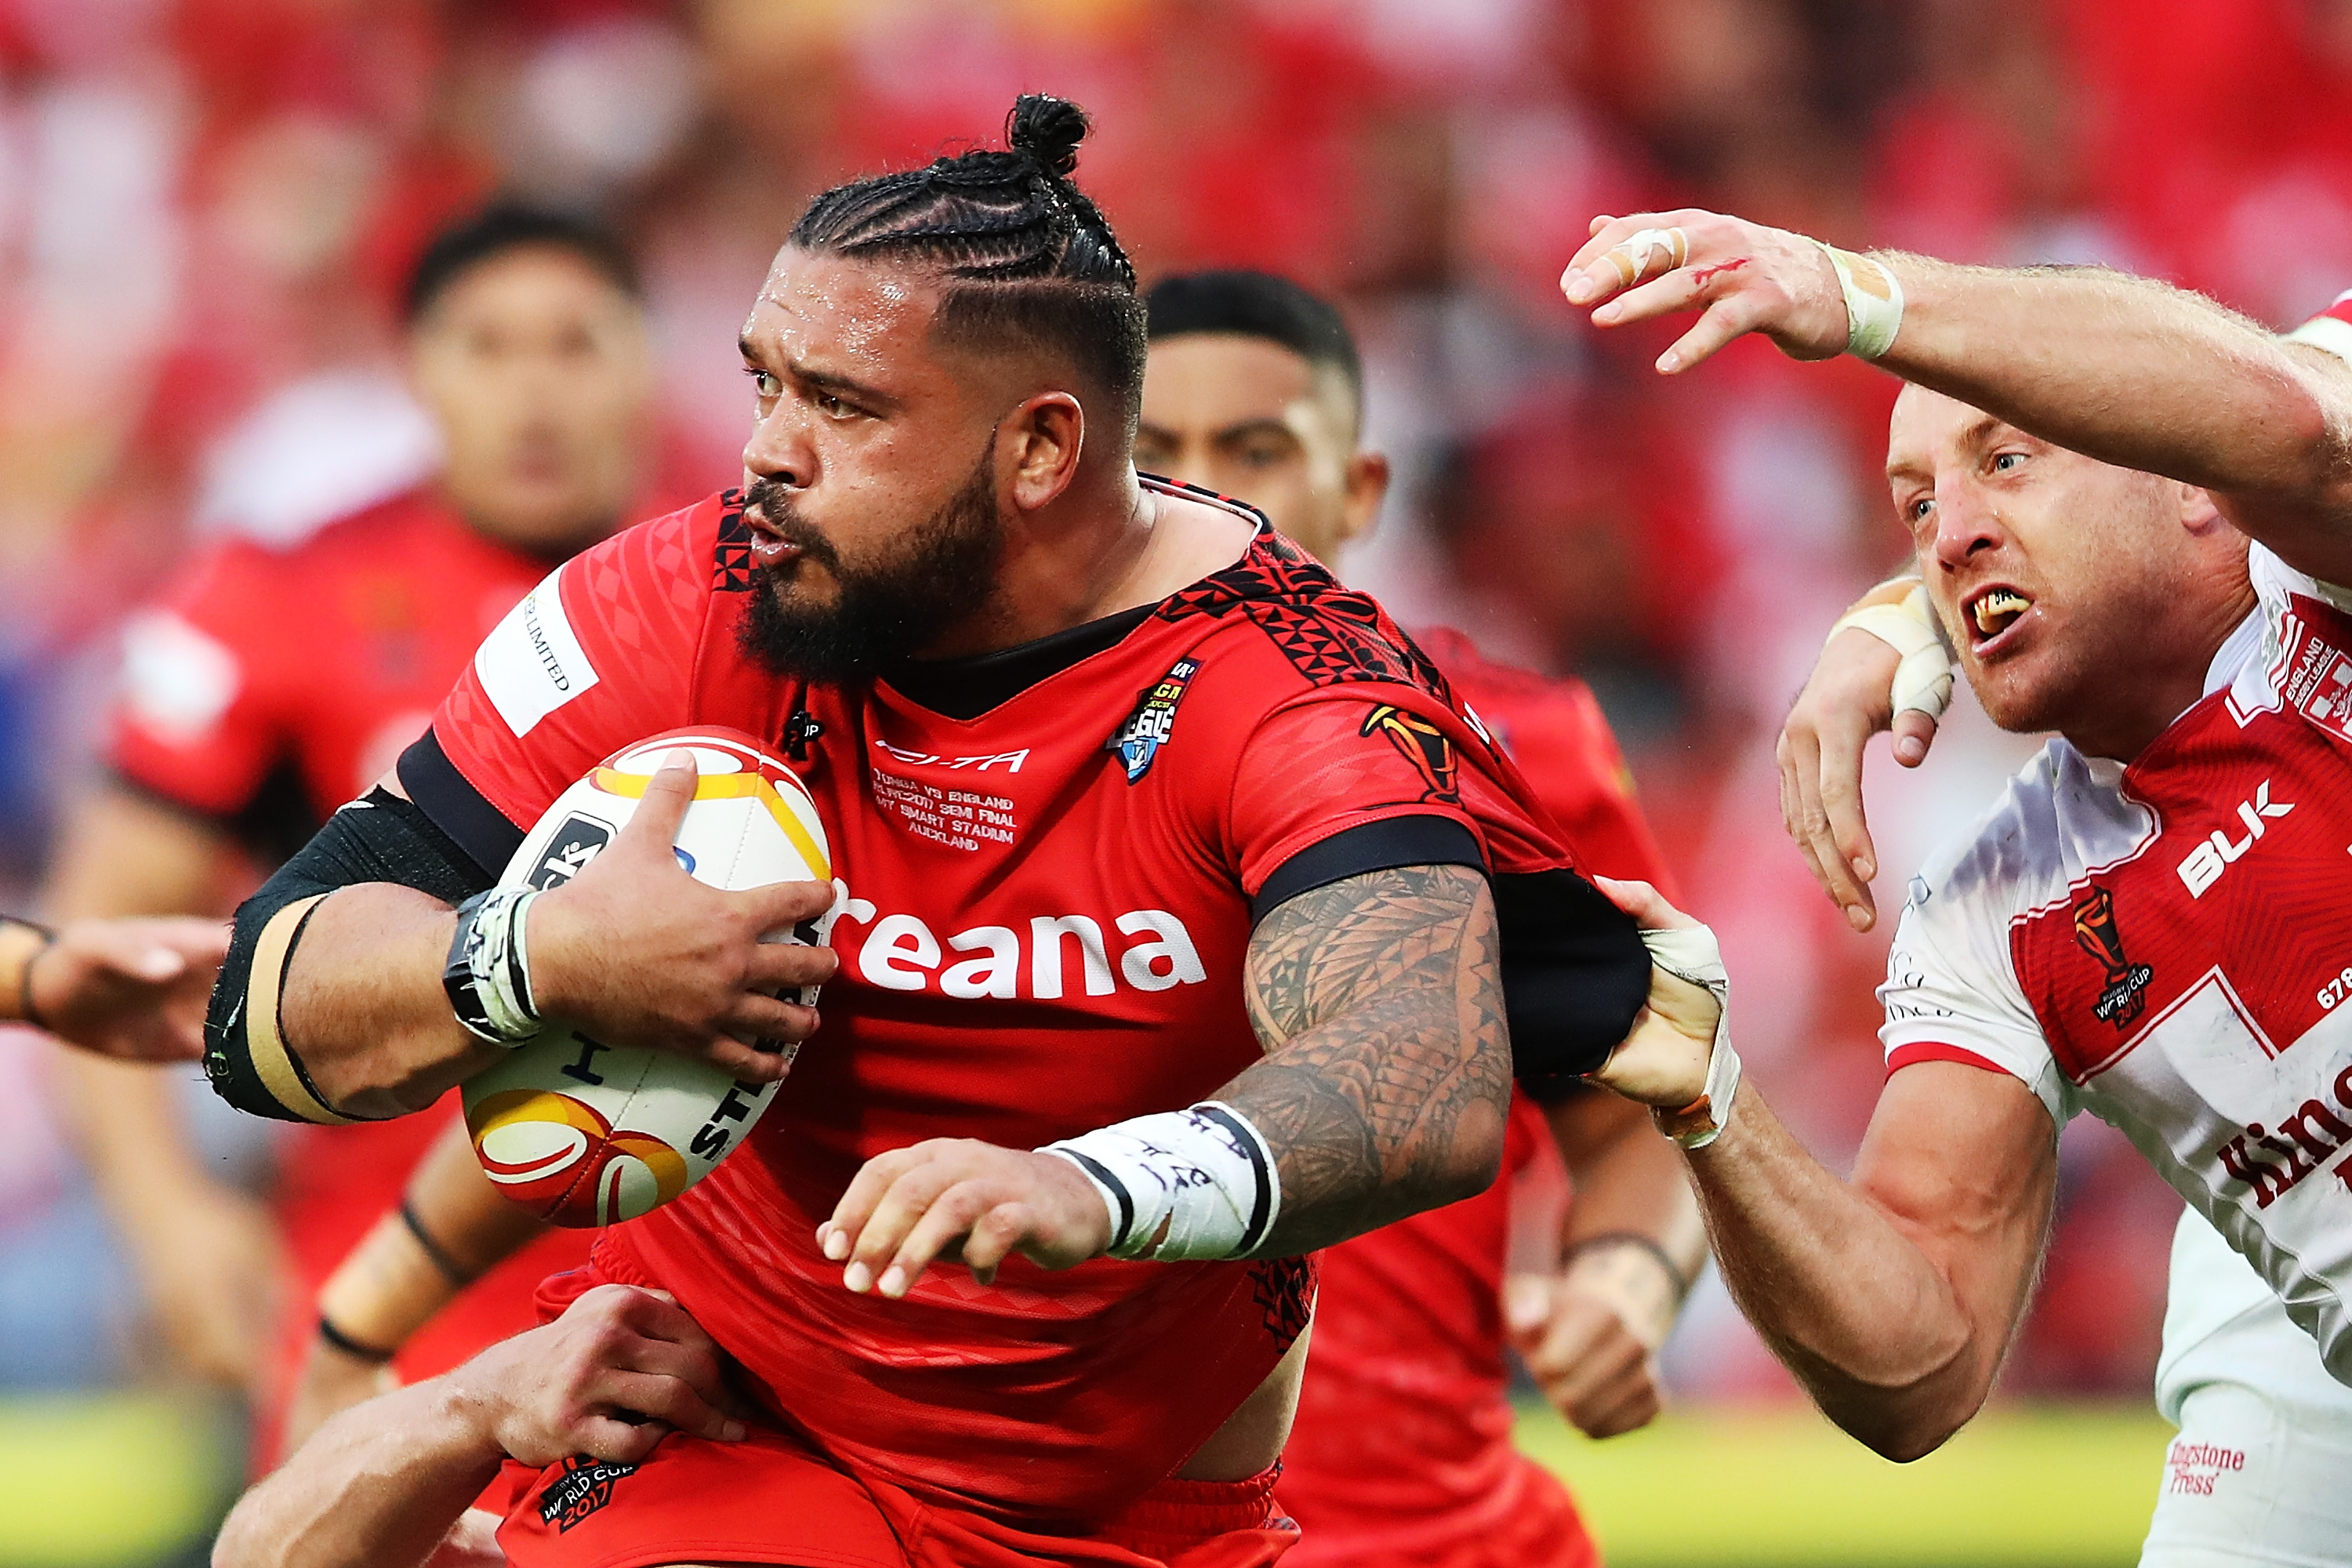 Murdoch-Masila expected to join first team squad imminently